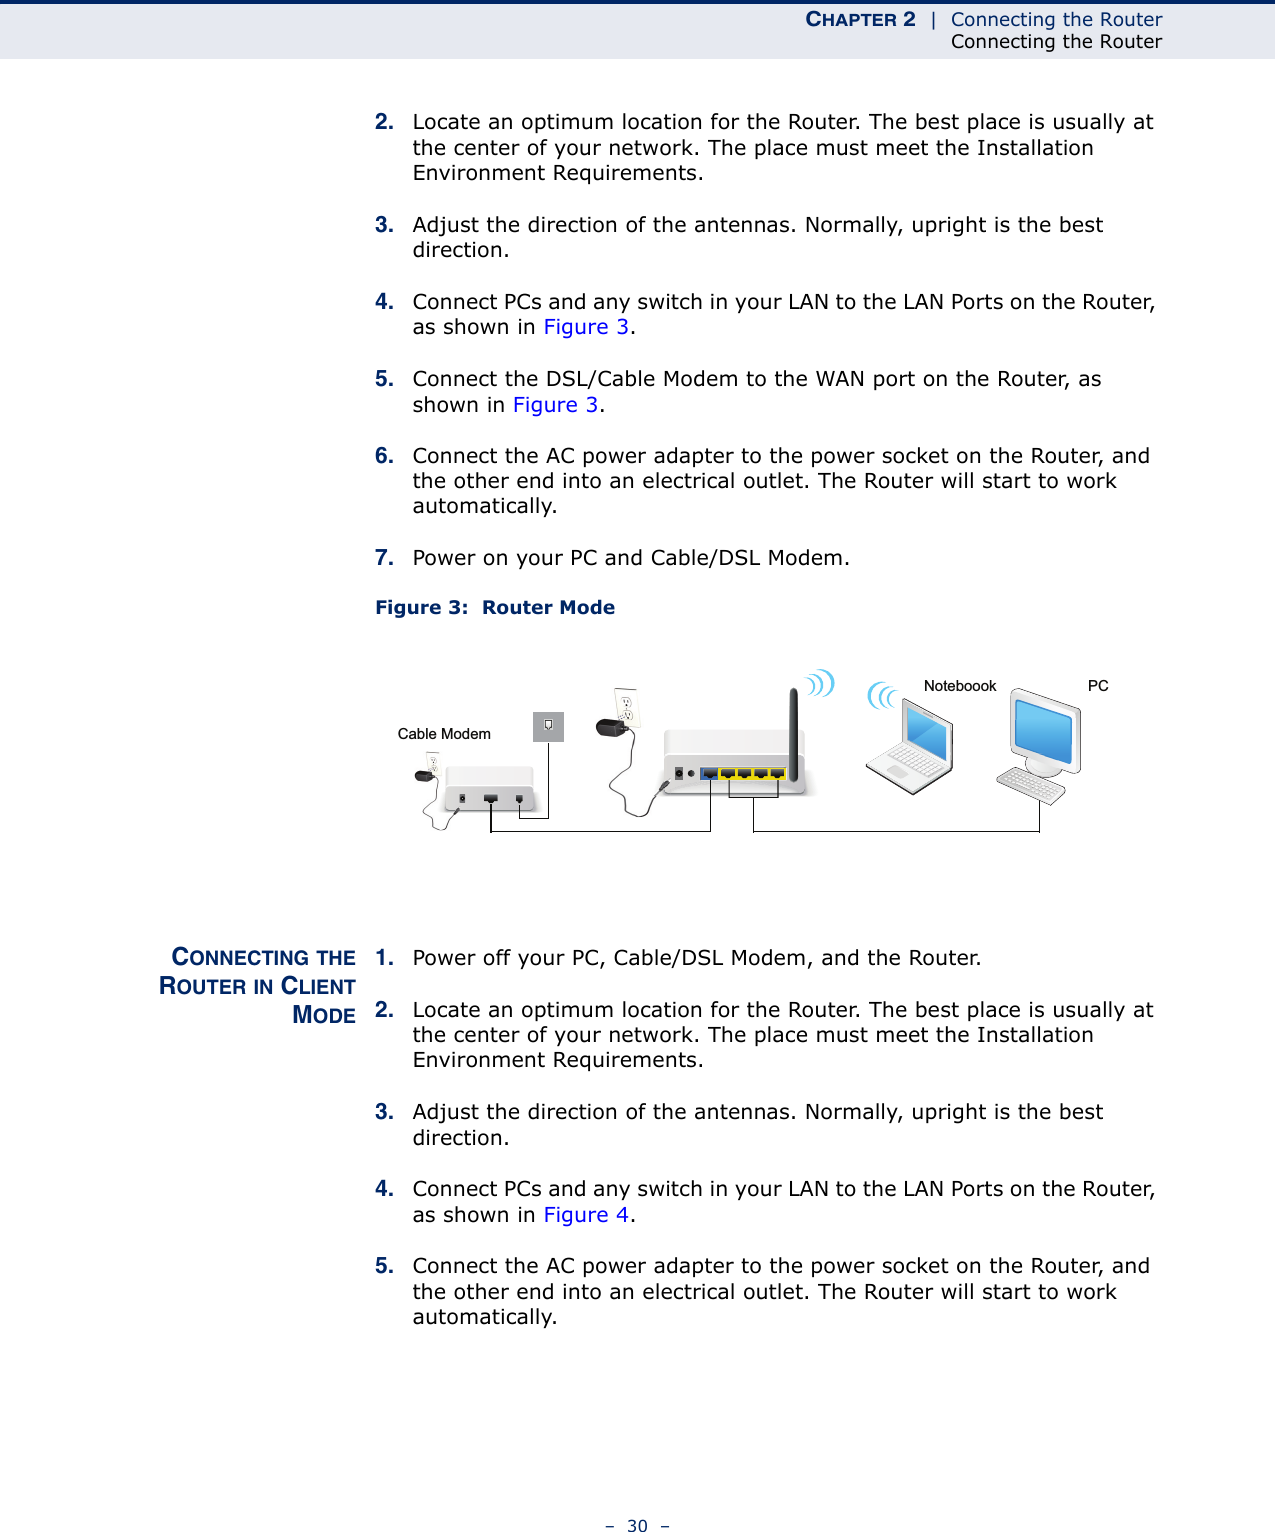 CHAPTER 2  |  Connecting the RouterConnecting the Router–  30  –2. Locate an optimum location for the Router. The best place is usually at the center of your network. The place must meet the Installation Environment Requirements. 3. Adjust the direction of the antennas. Normally, upright is the best direction.4. Connect PCs and any switch in your LAN to the LAN Ports on the Router, as shown in Figure 3. 5. Connect the DSL/Cable Modem to the WAN port on the Router, as shown in Figure 3.6. Connect the AC power adapter to the power socket on the Router, and the other end into an electrical outlet. The Router will start to work automatically.7. Power on your PC and Cable/DSL Modem.Figure 3:  Router ModeCONNECTING THEROUTER IN CLIENTMODE1. Power off your PC, Cable/DSL Modem, and the Router. 2. Locate an optimum location for the Router. The best place is usually at the center of your network. The place must meet the Installation Environment Requirements. 3. Adjust the direction of the antennas. Normally, upright is the best direction.4. Connect PCs and any switch in your LAN to the LAN Ports on the Router, as shown in Figure 4. 5. Connect the AC power adapter to the power socket on the Router, and the other end into an electrical outlet. The Router will start to work automatically.PCNoteboookCable Modem